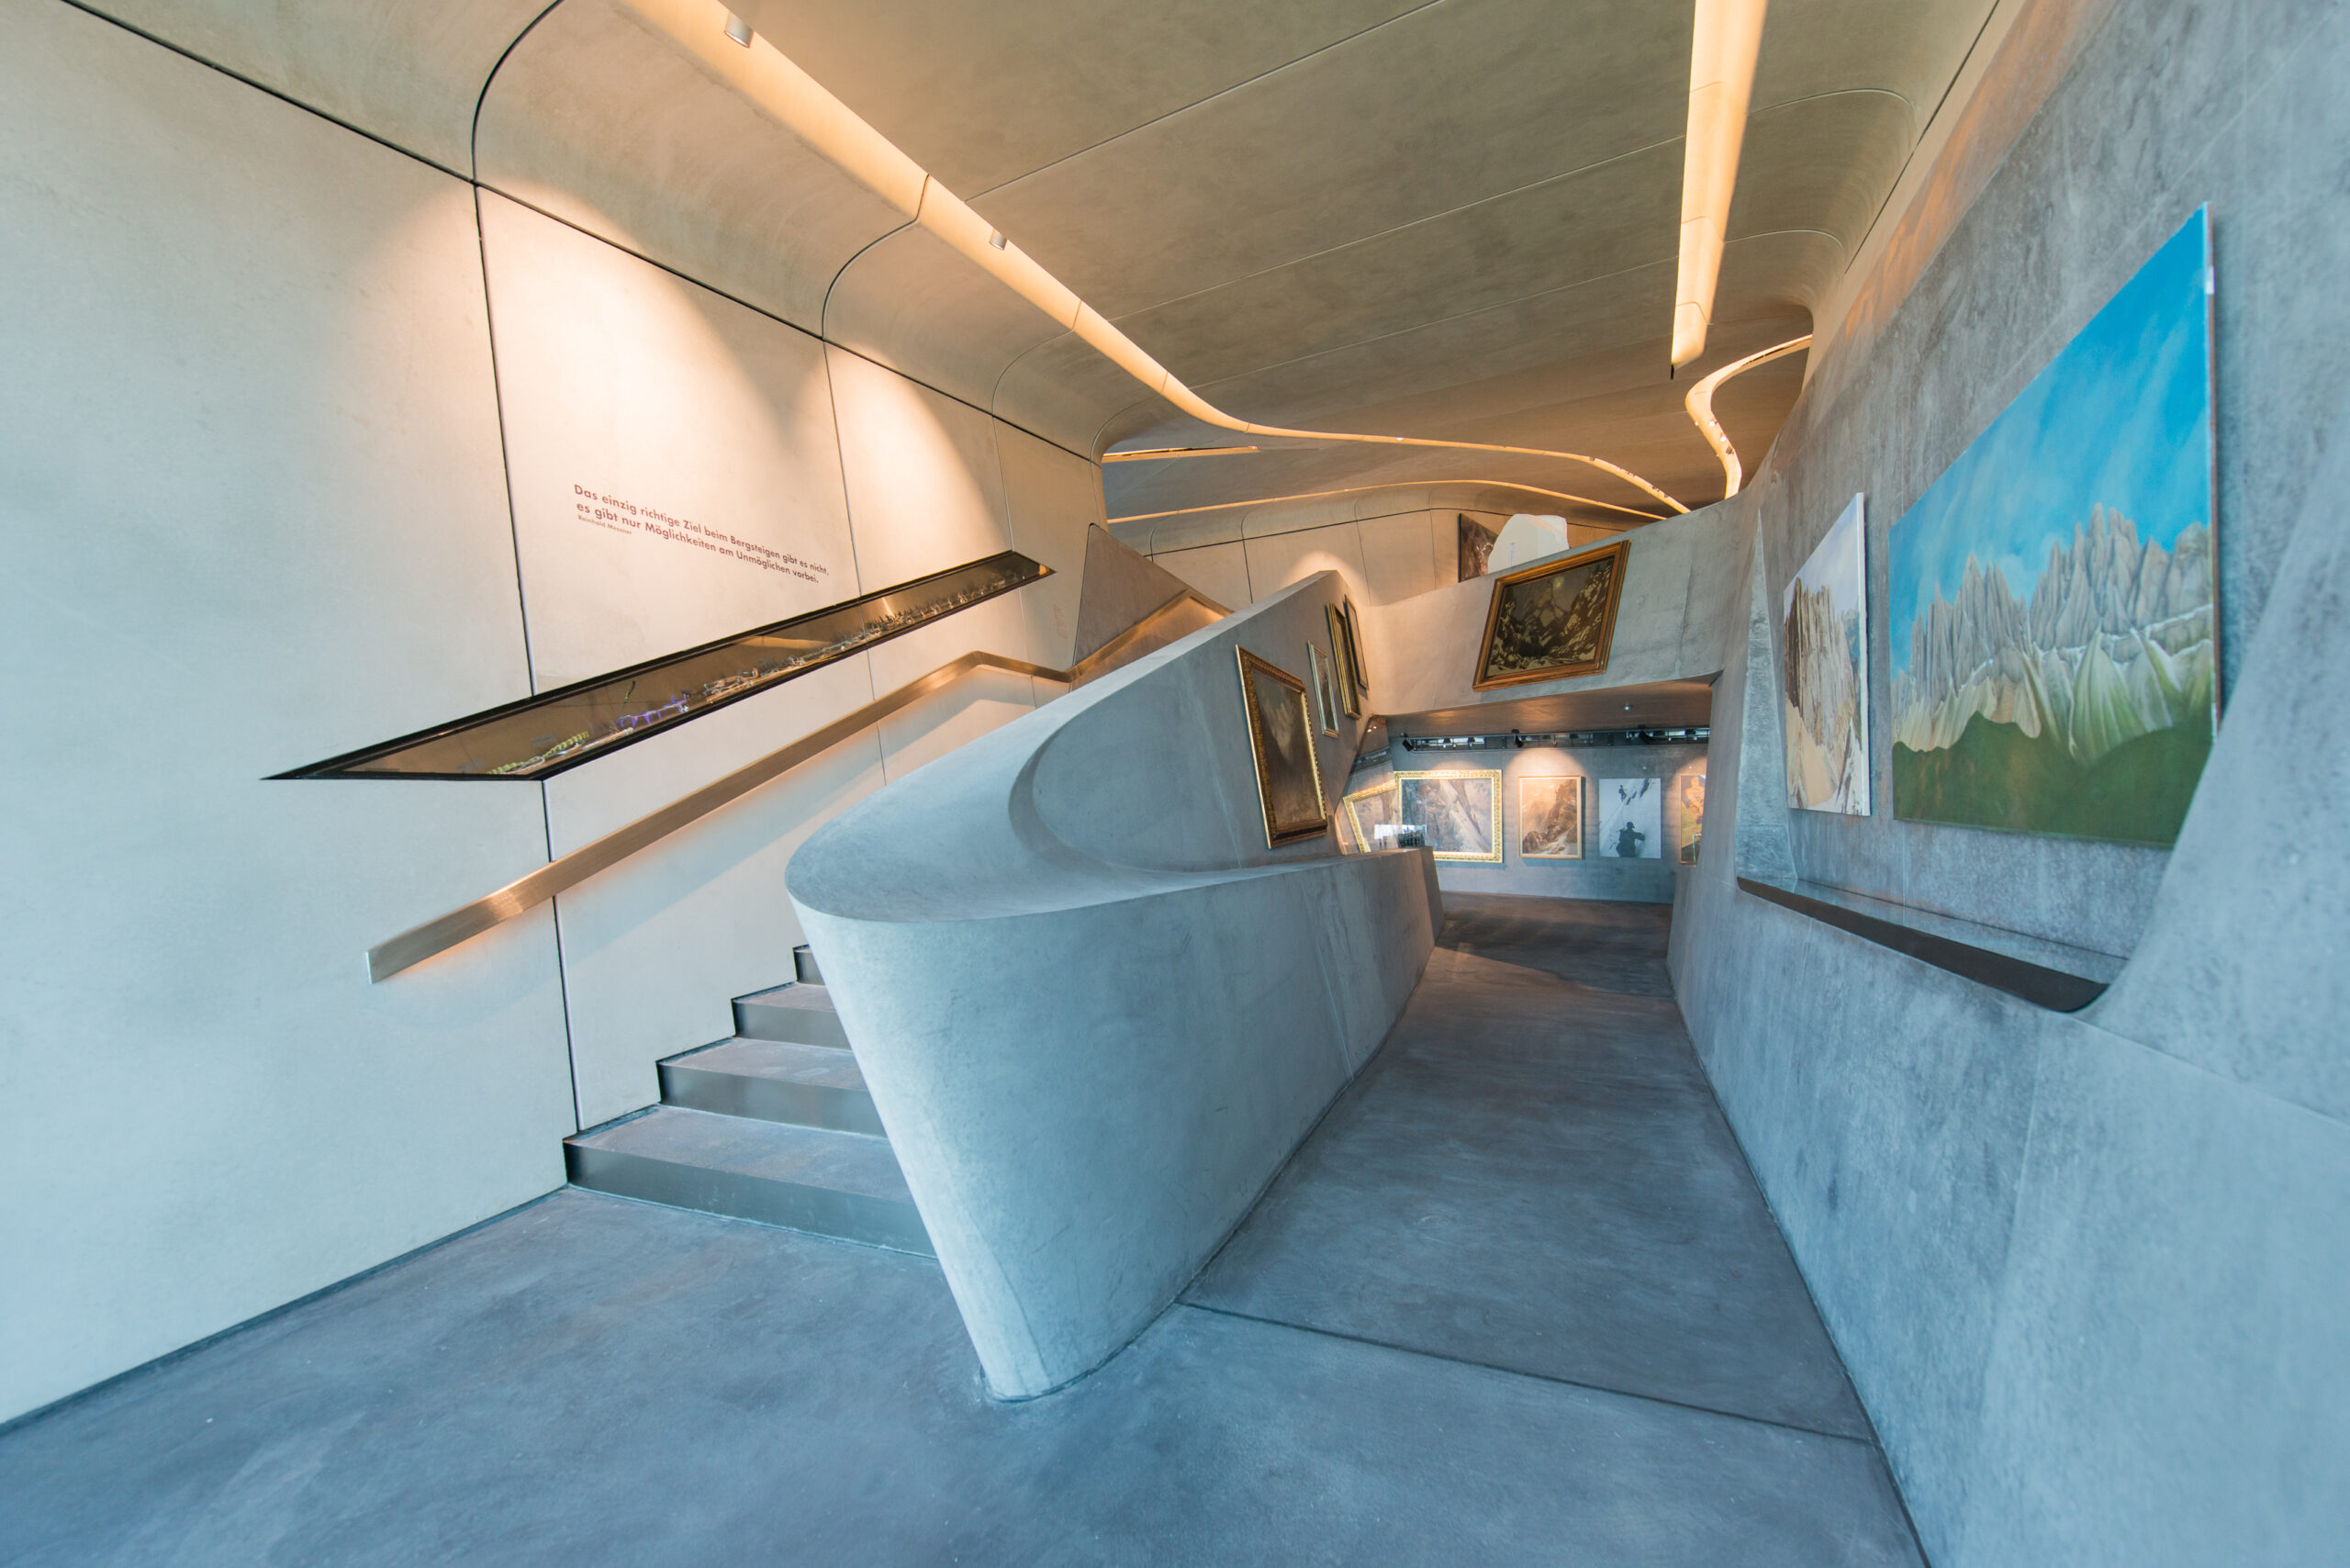 A view of the uneven concrete interior of Messner Mountain Museum Coronesby Zaha Hadid Architects